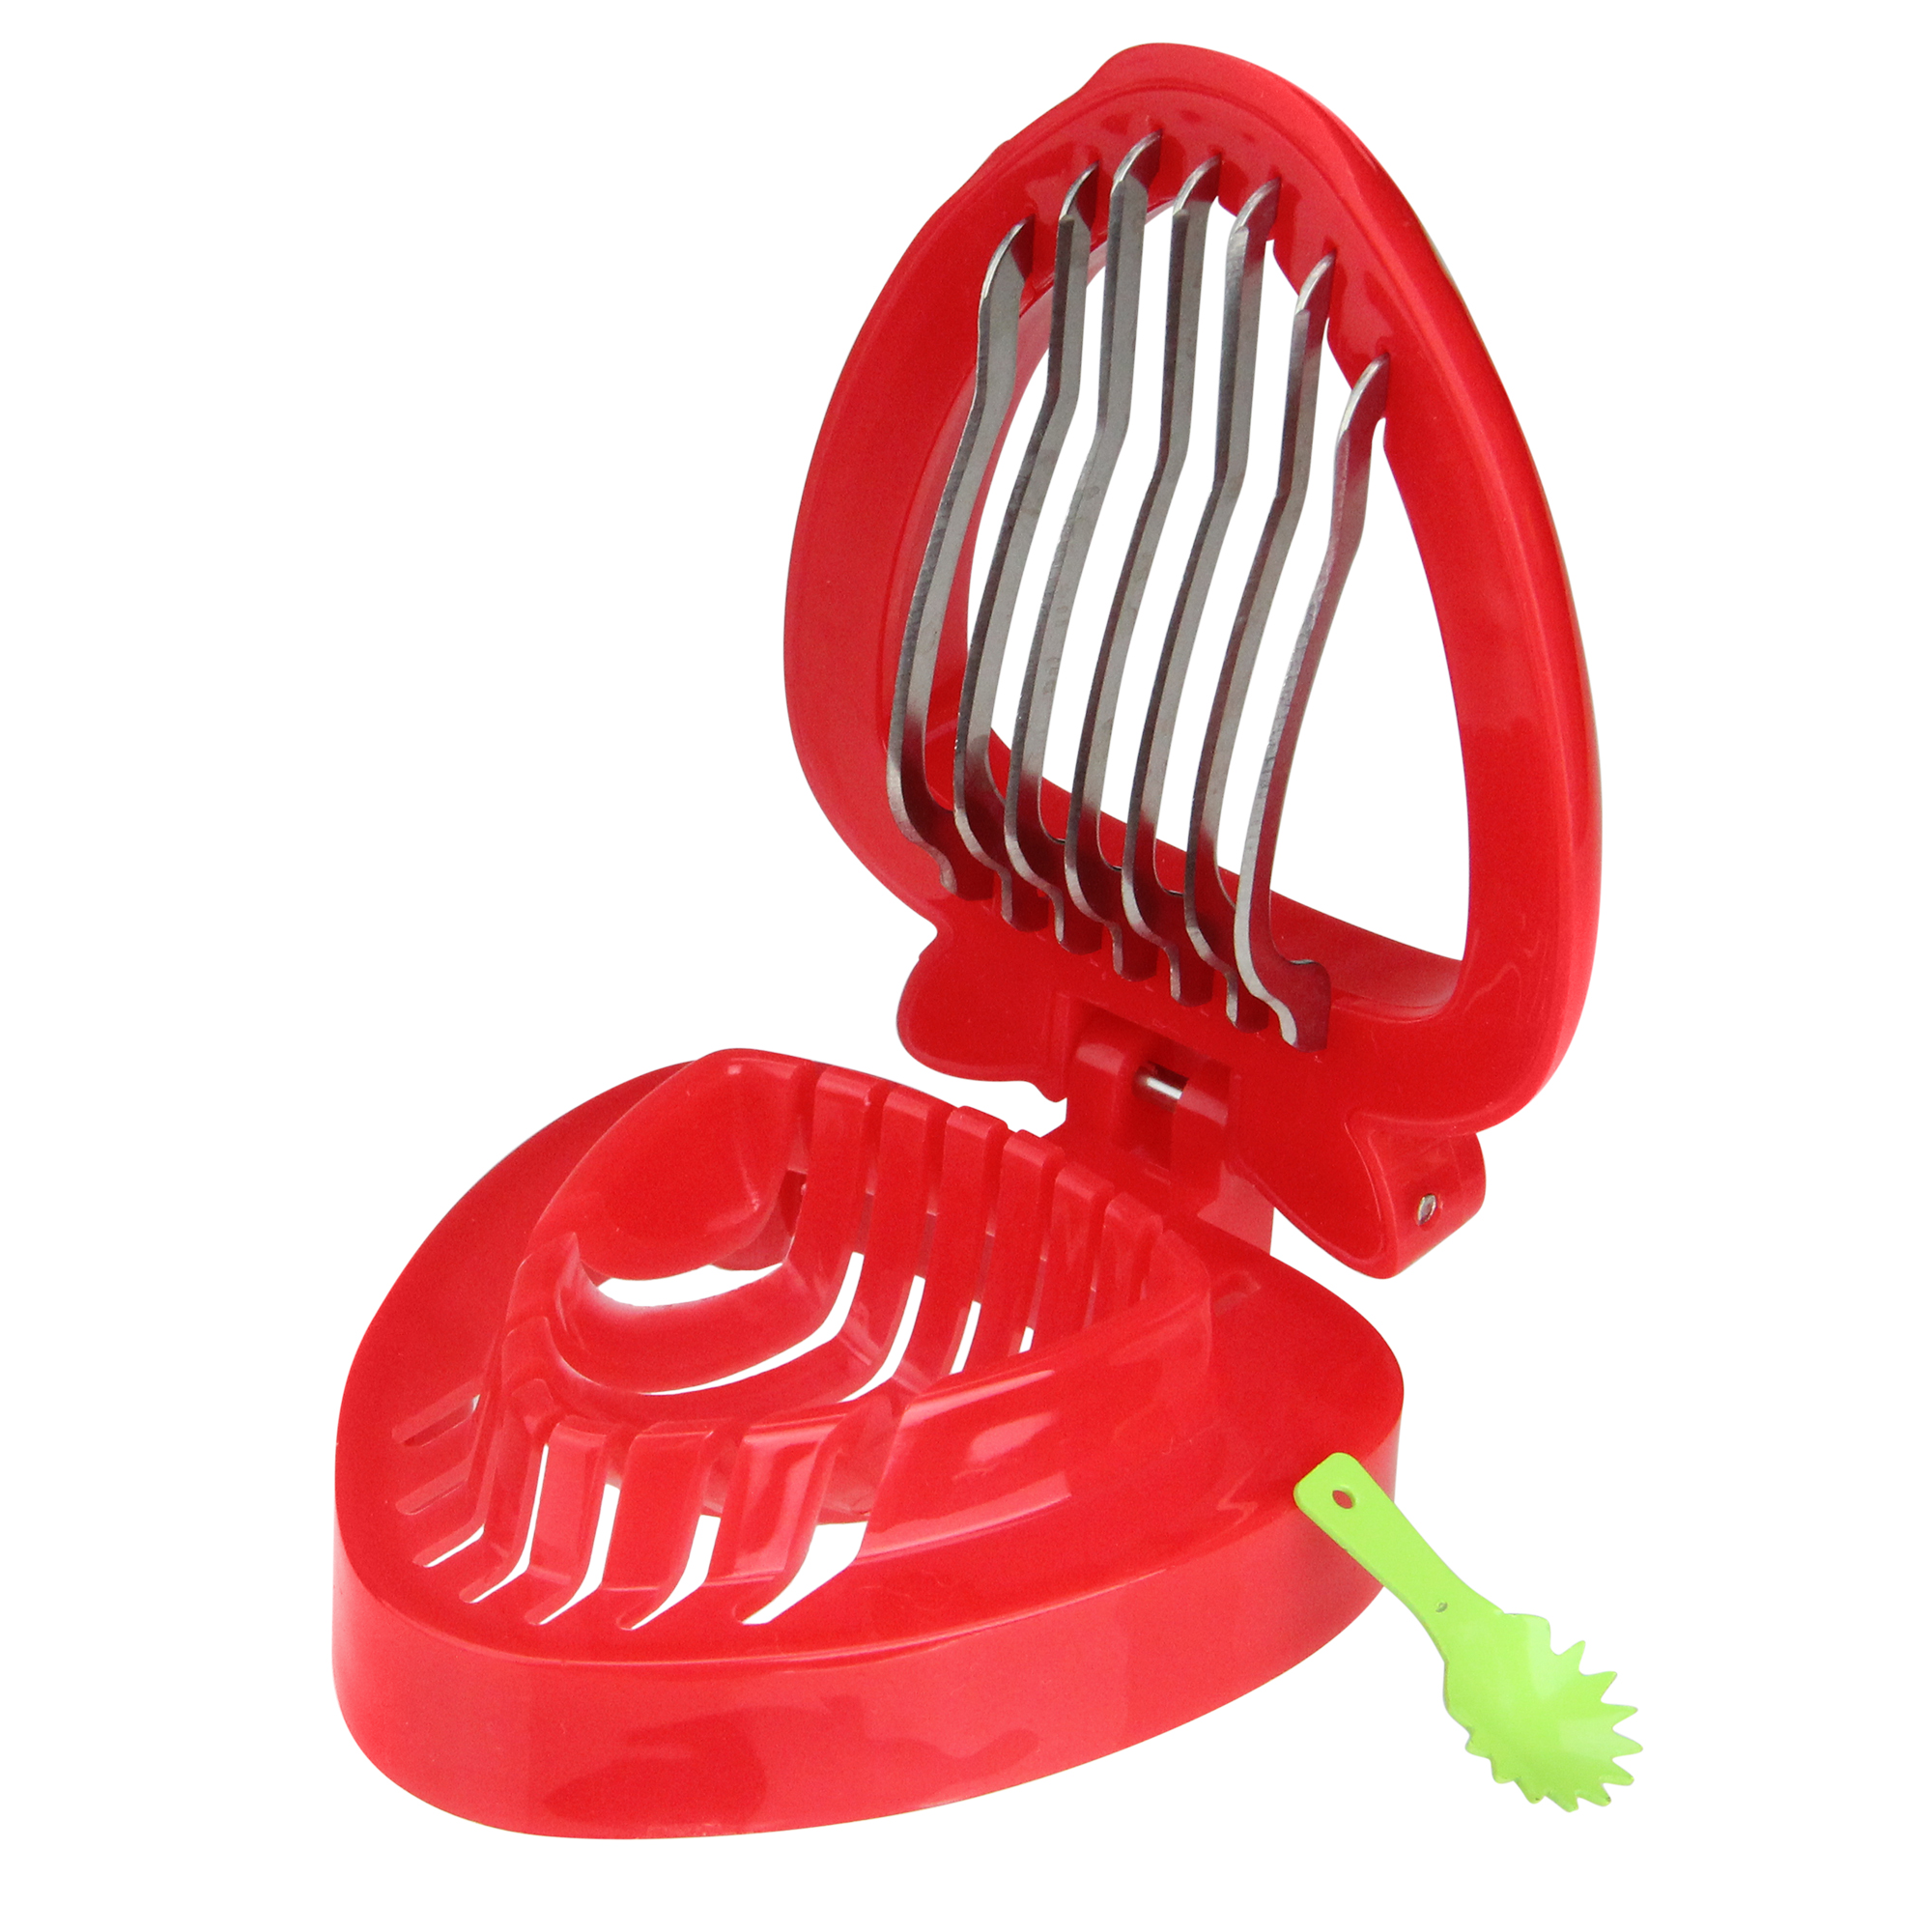 4" Red and Silver Strawberry Slicer with a Lime Green Huller - image 1 of 2